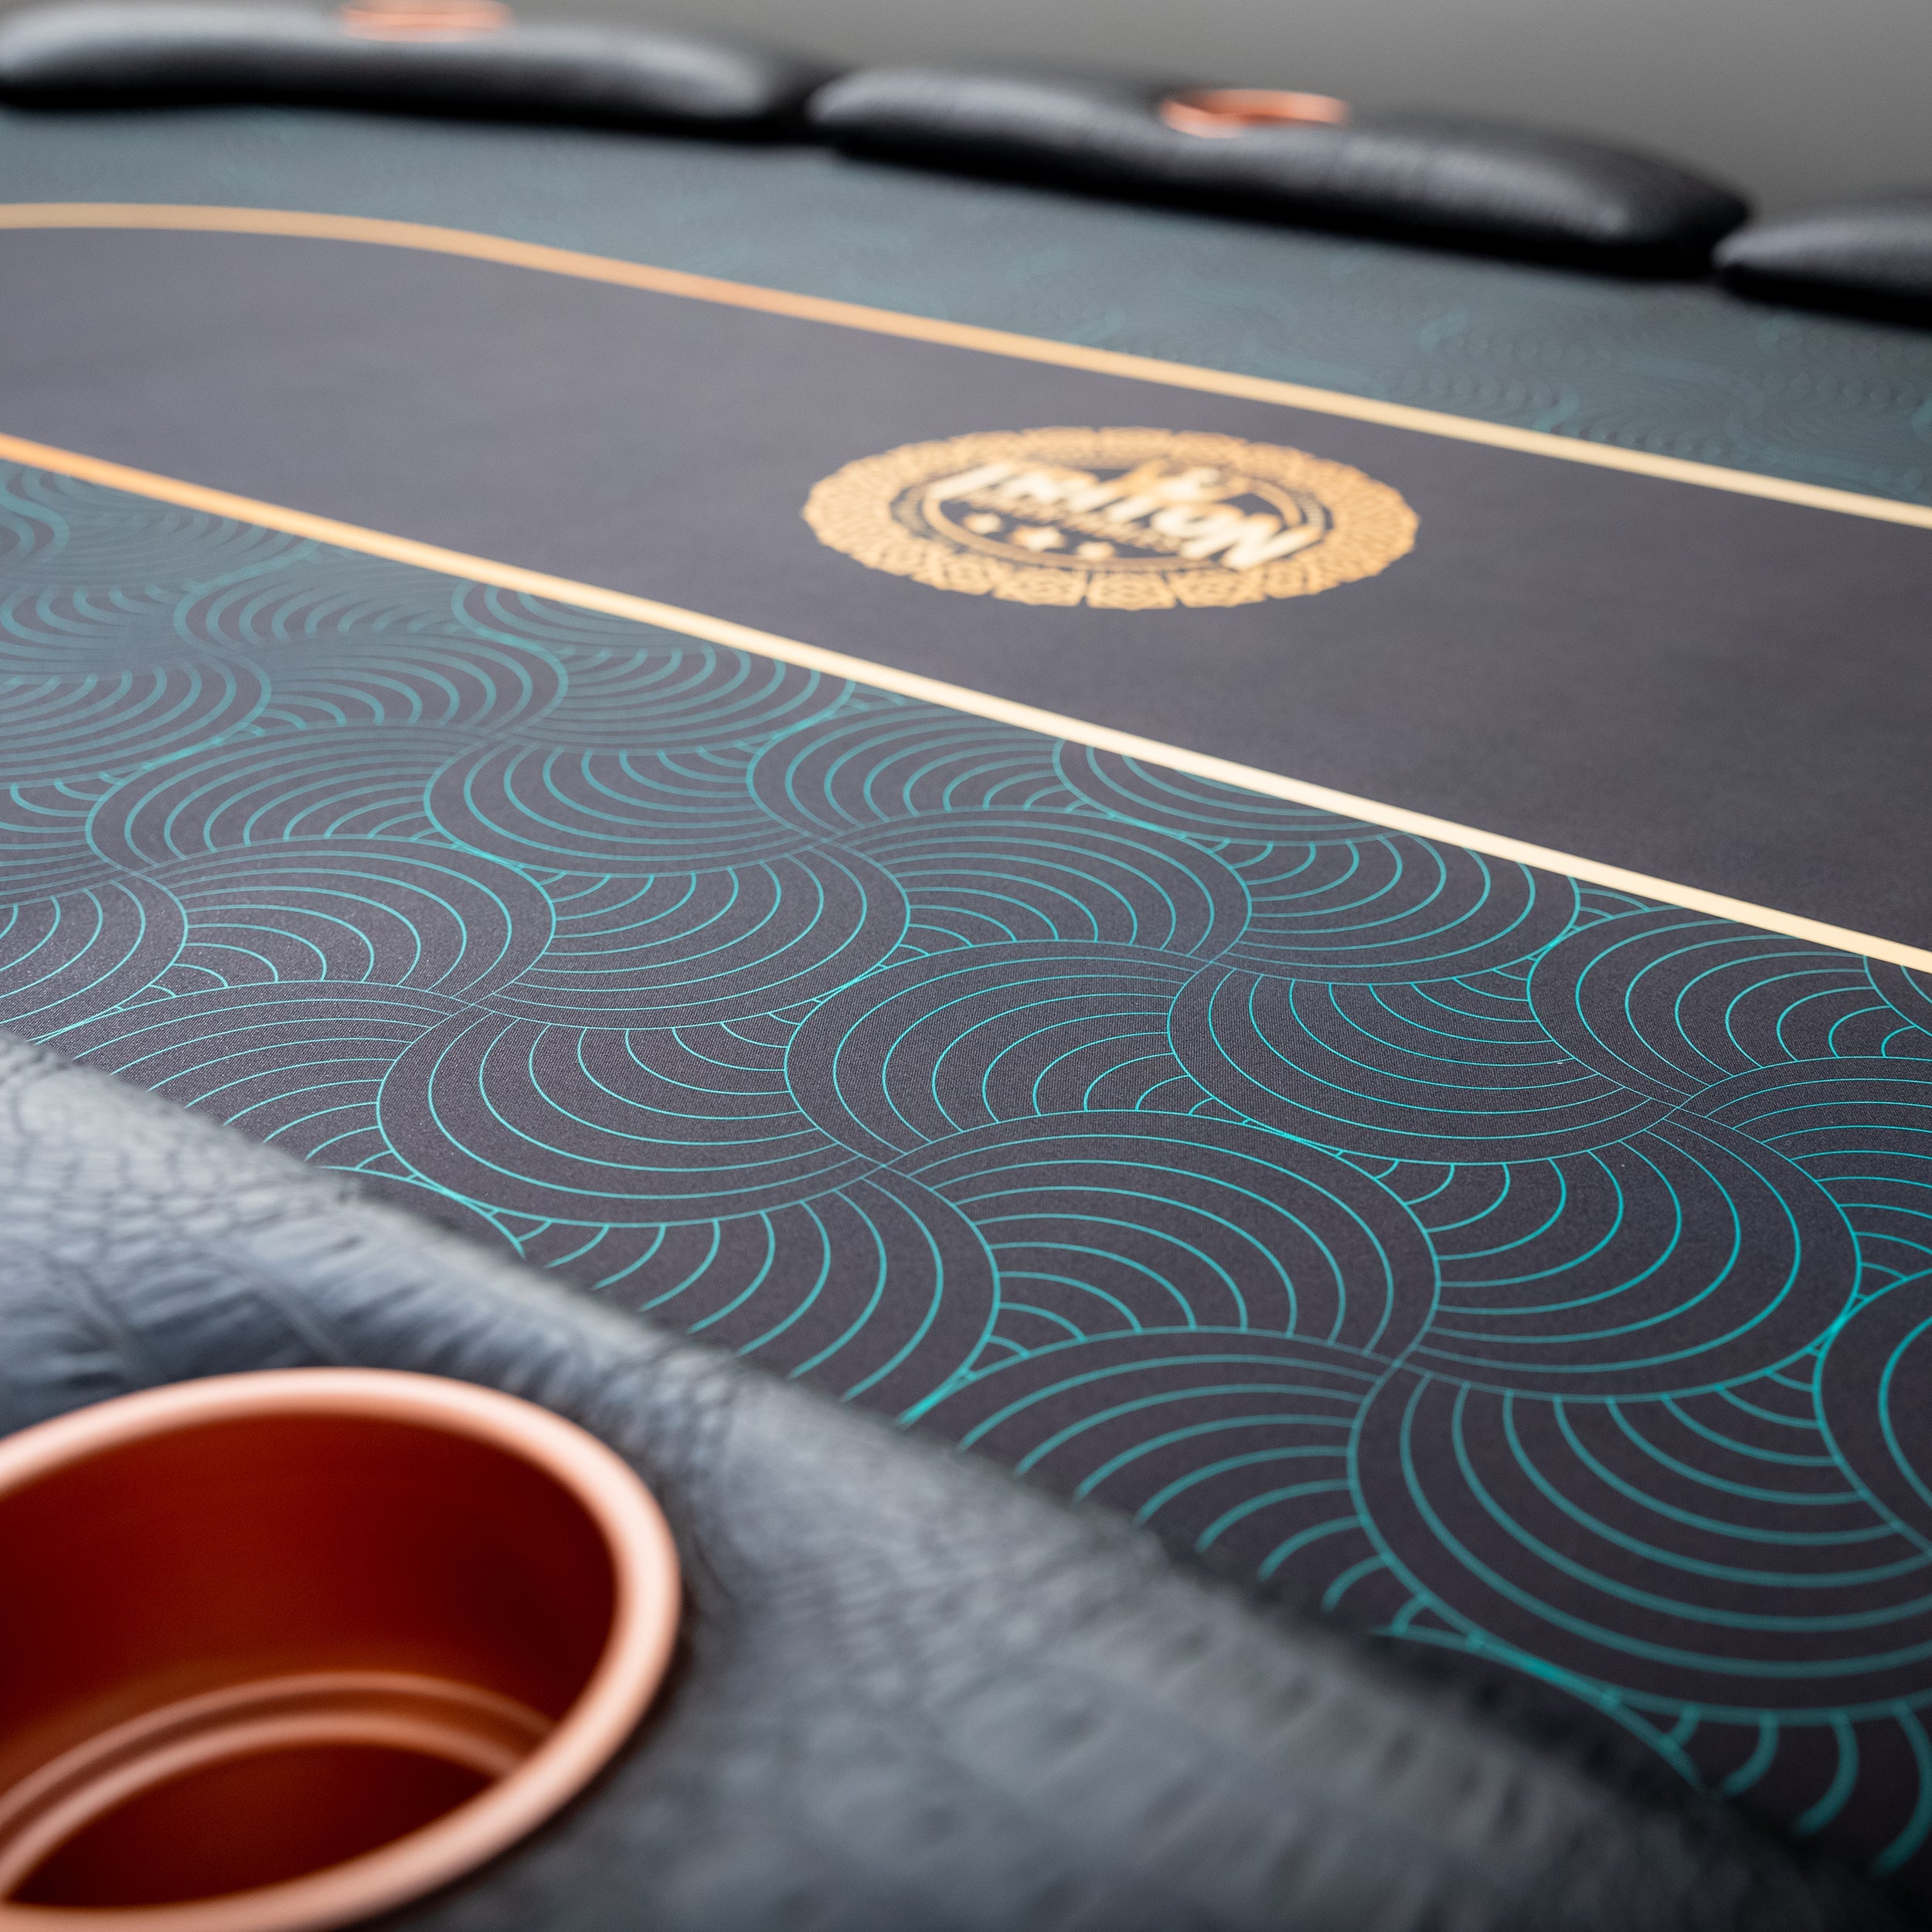 Triton Portable Poker Mat with Carry Case